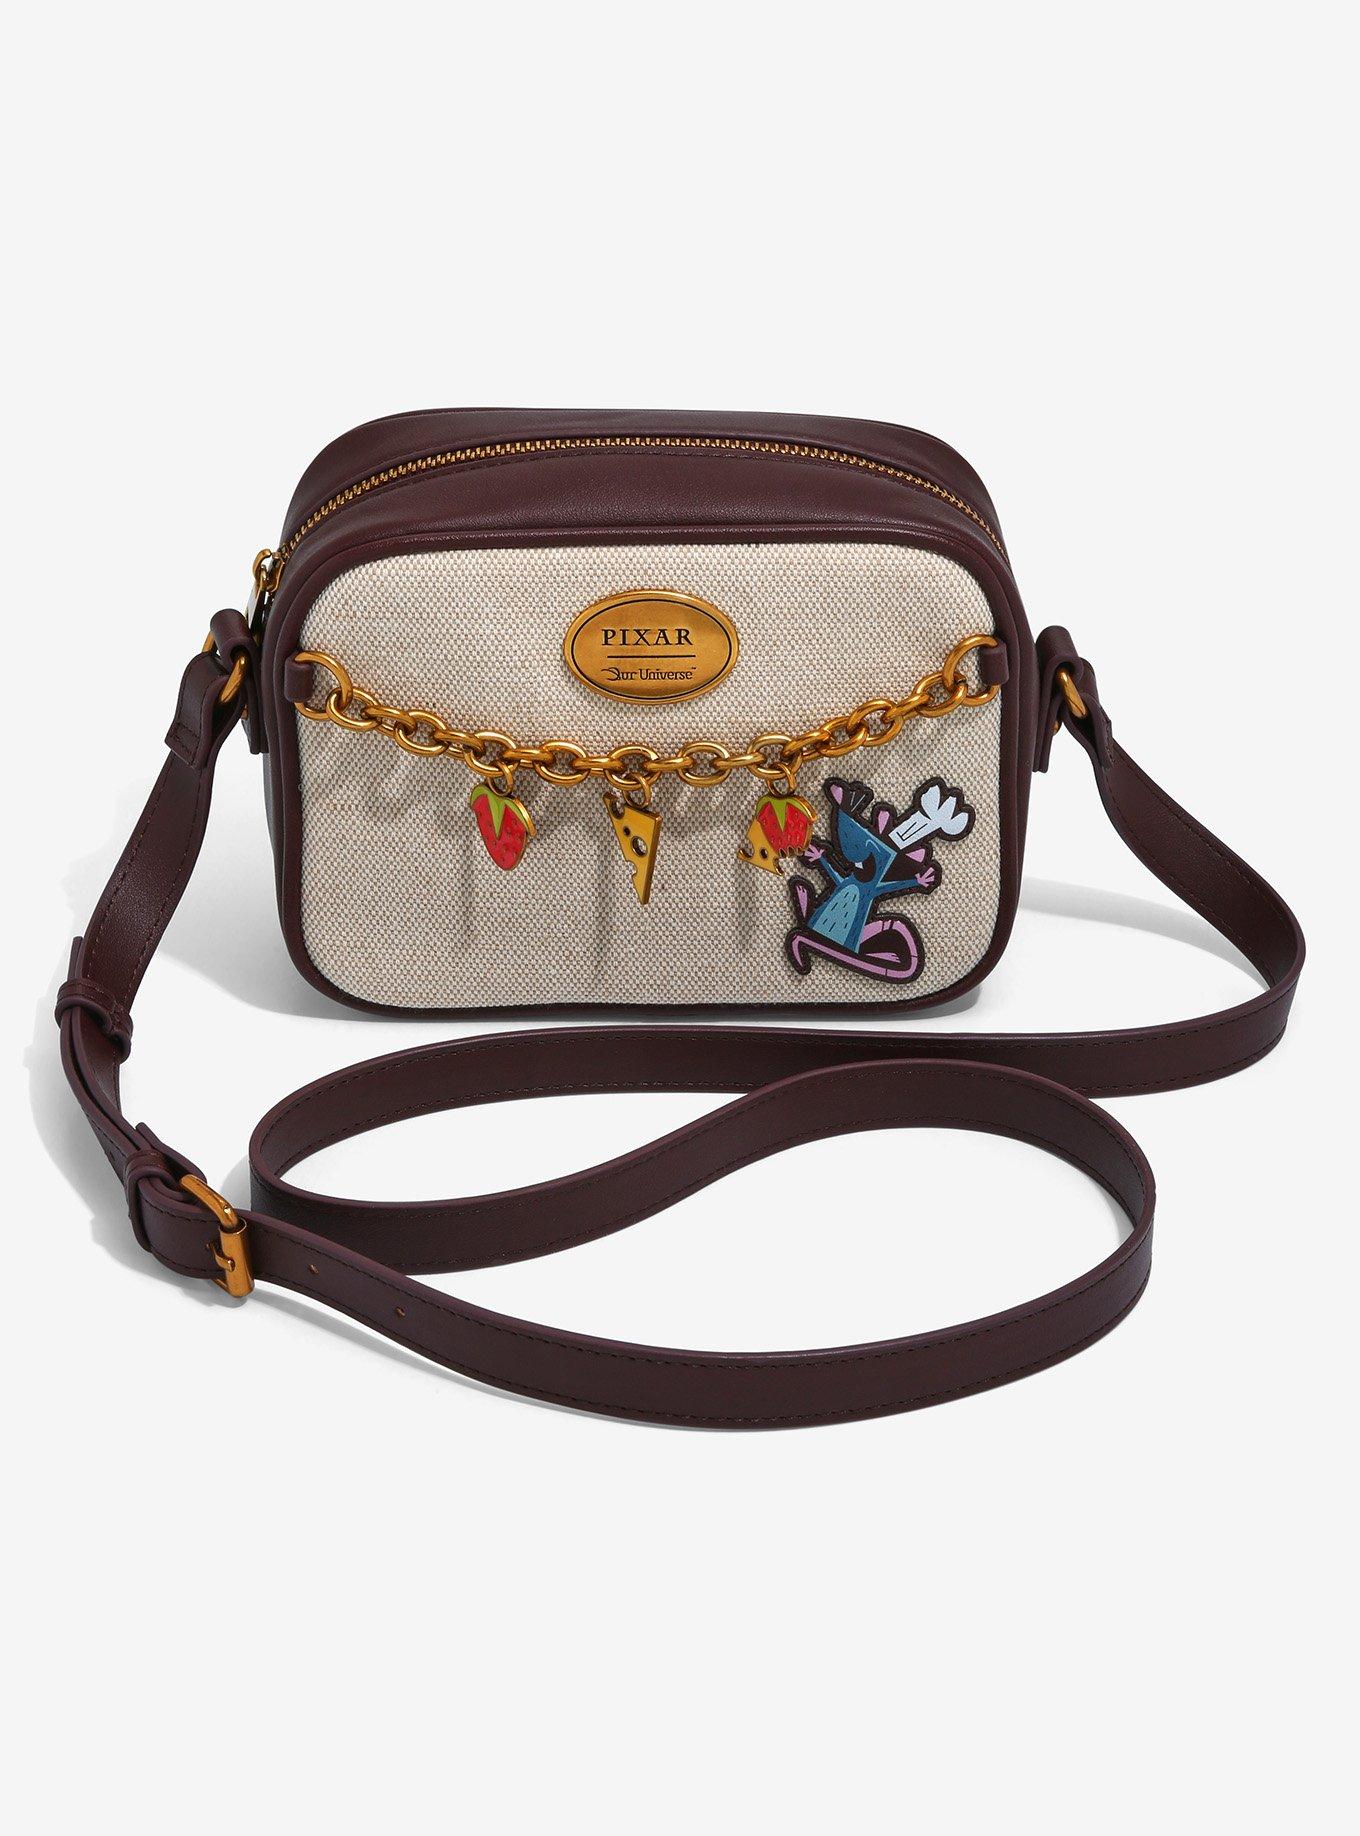 Our Universe Disney Pixar Ratatouille Chef Remy & Ingredients Crossbody Bag - BoxLunch Exclusive